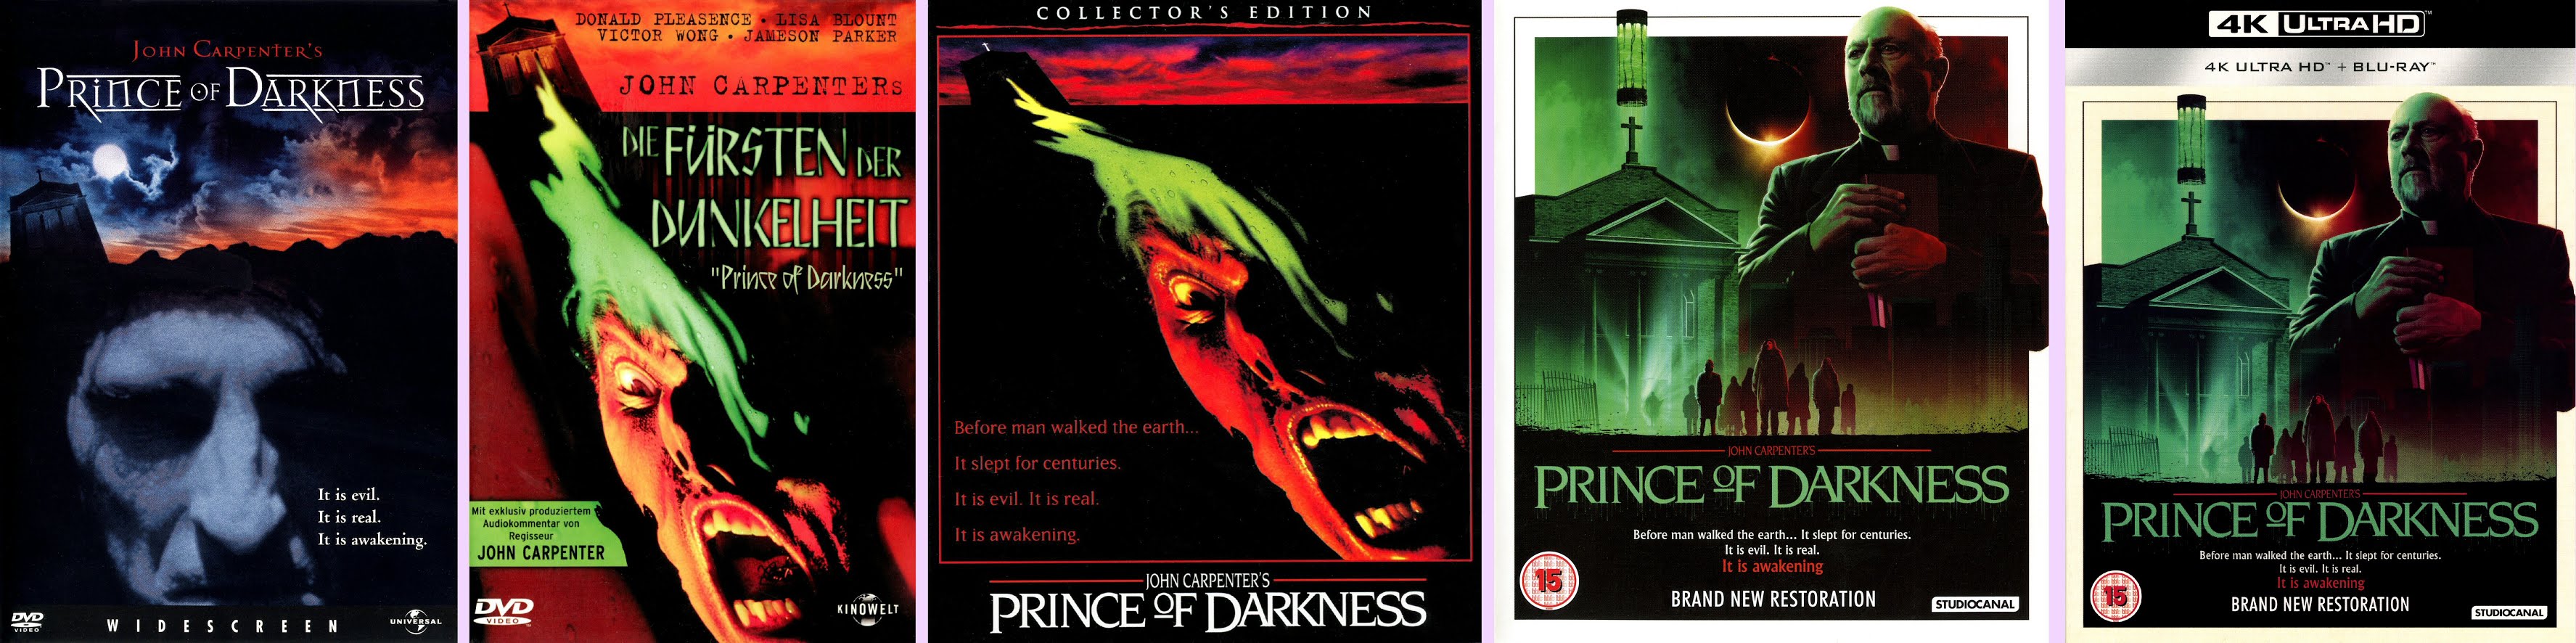 DVD Exotica: Prince of Darkness Leaping Again to 4K Ultra HD (DVD/ Blu-ray/  UHD Comparison)